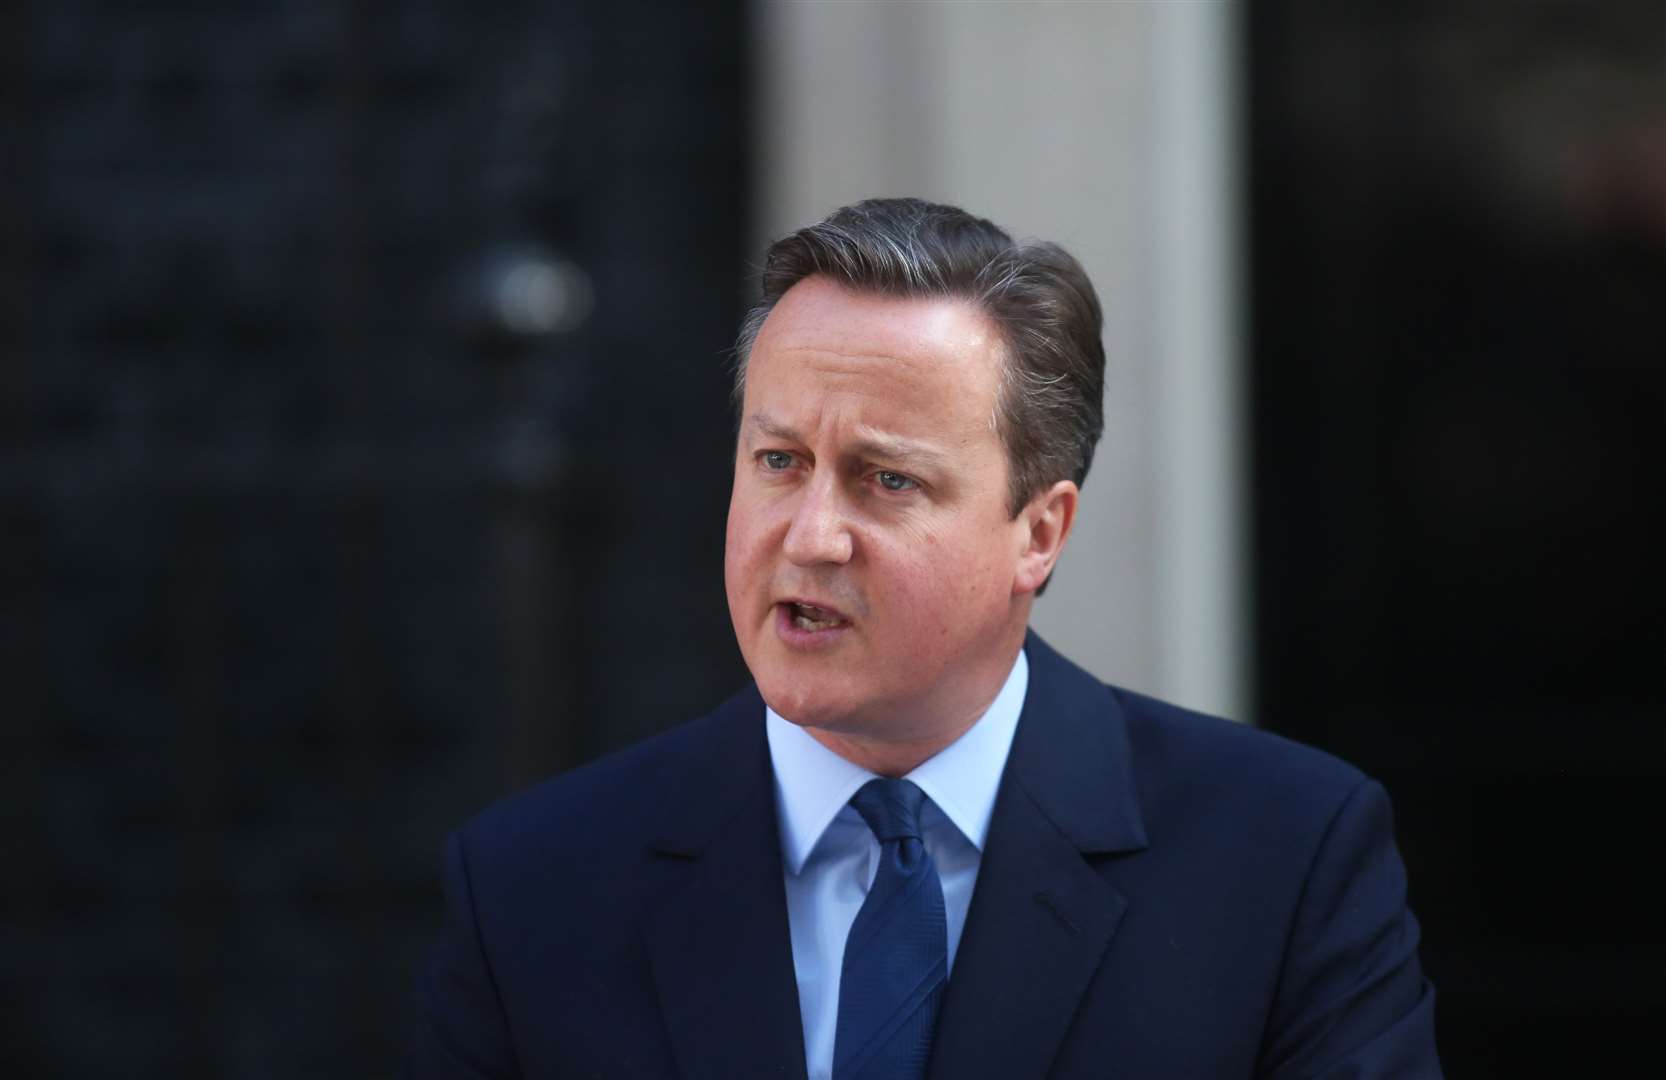 Prime Minister David Cameron announces his resignation after UK votes to leave the European Union, outside of 10 Downing Street.